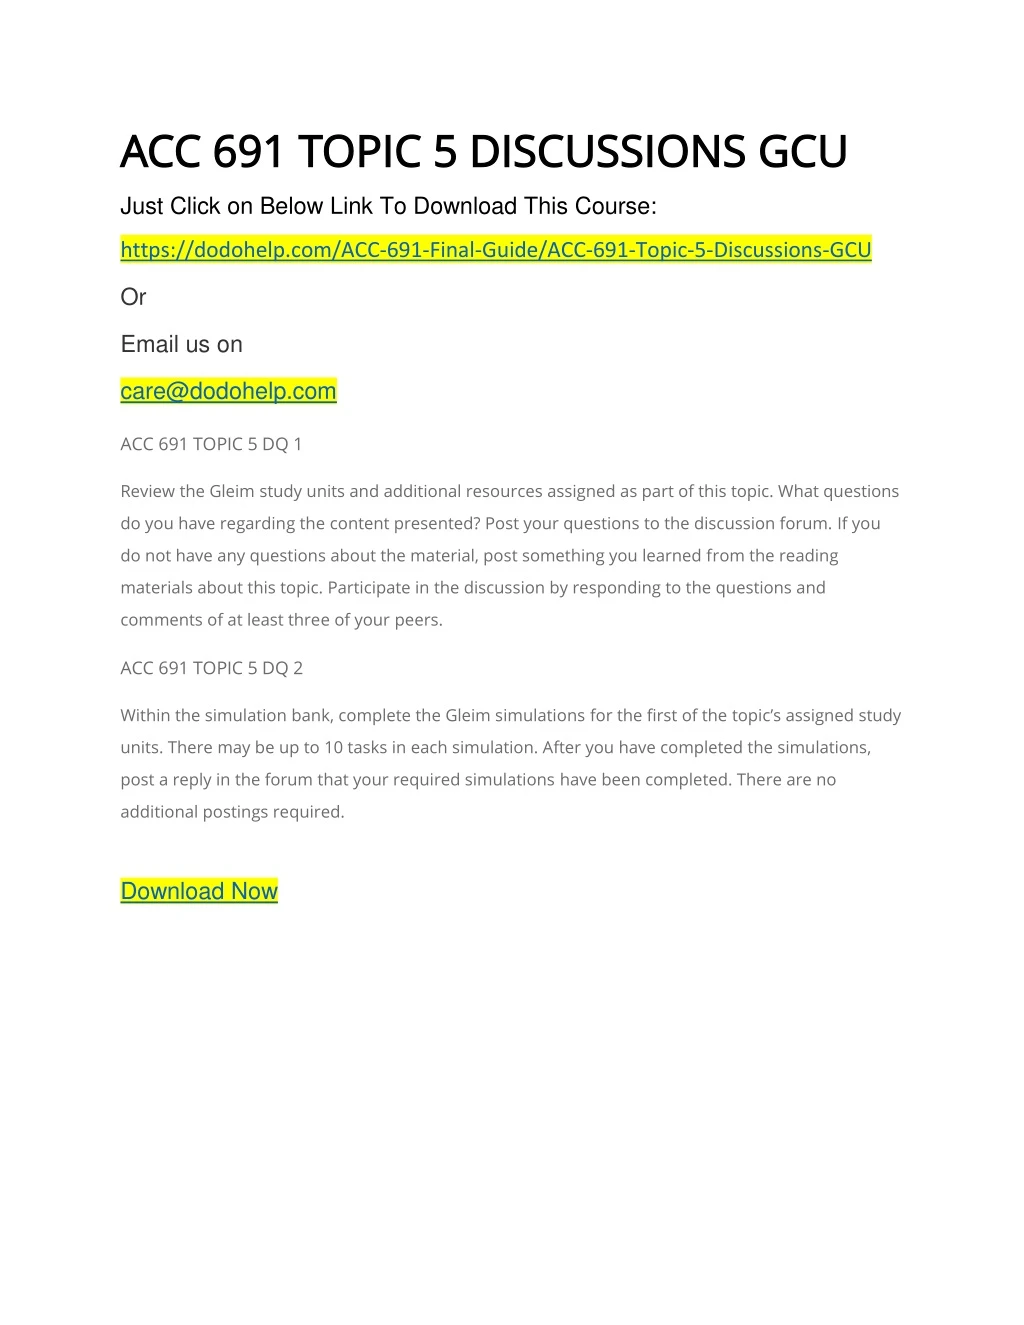 acc 691 topic 5 disc acc 691 topic 5 discussions